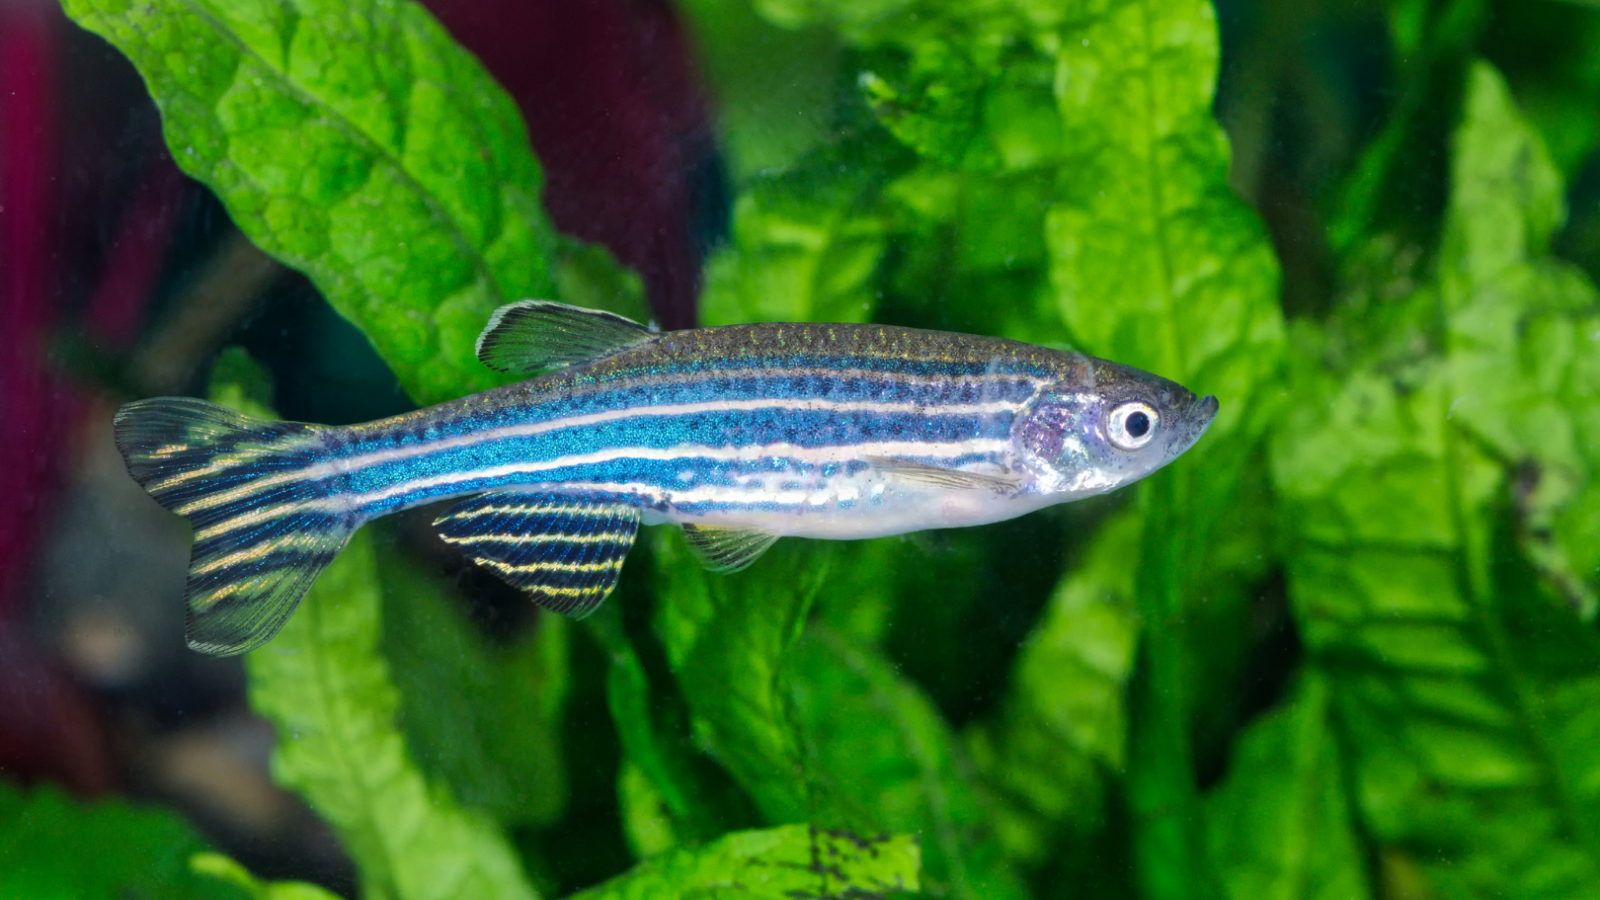 Why do scientists use zebrafish in research?